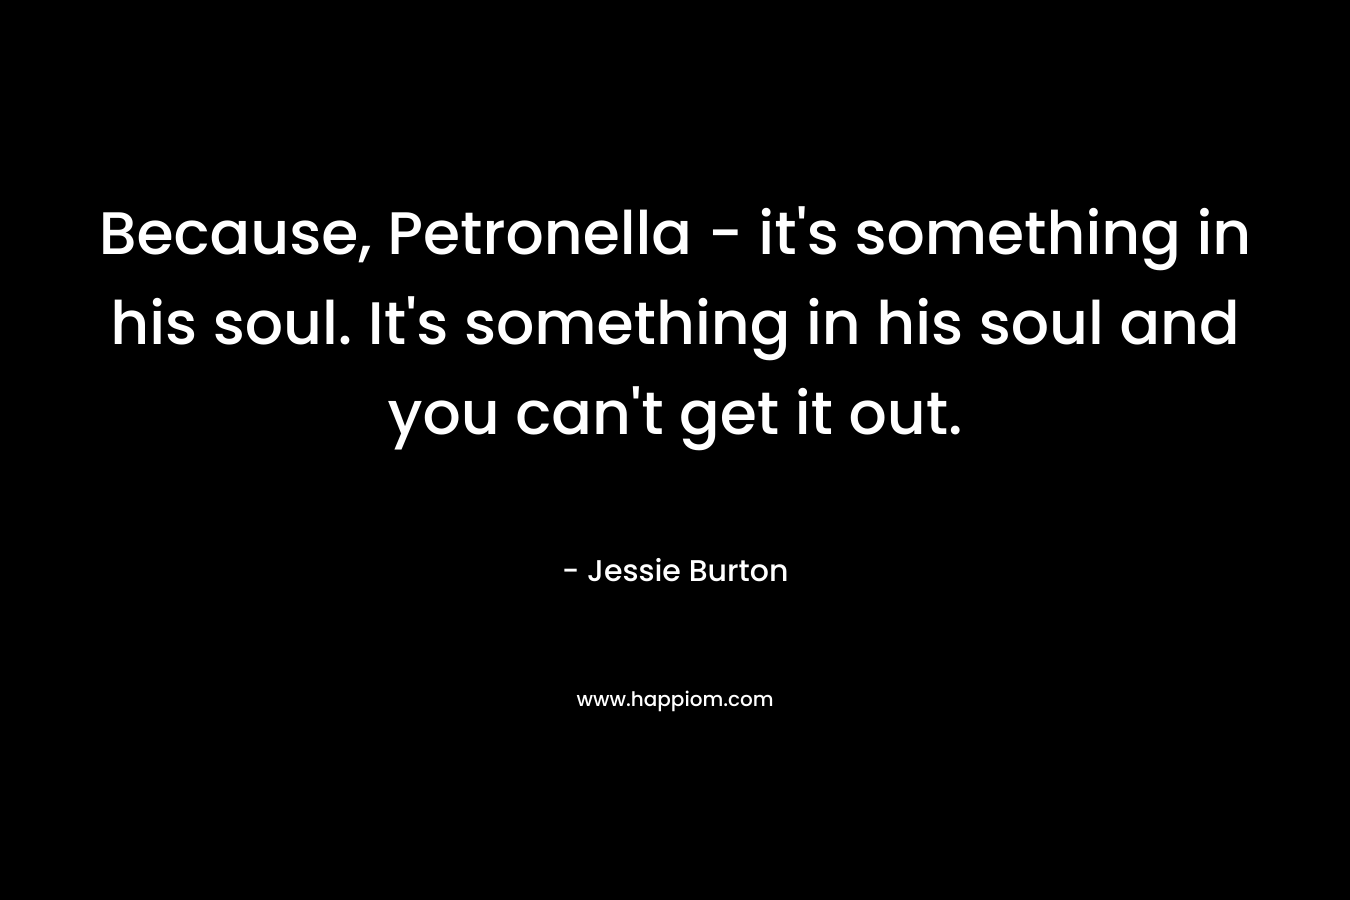 Because, Petronella – it’s something in his soul. It’s something in his soul and you can’t get it out. – Jessie Burton